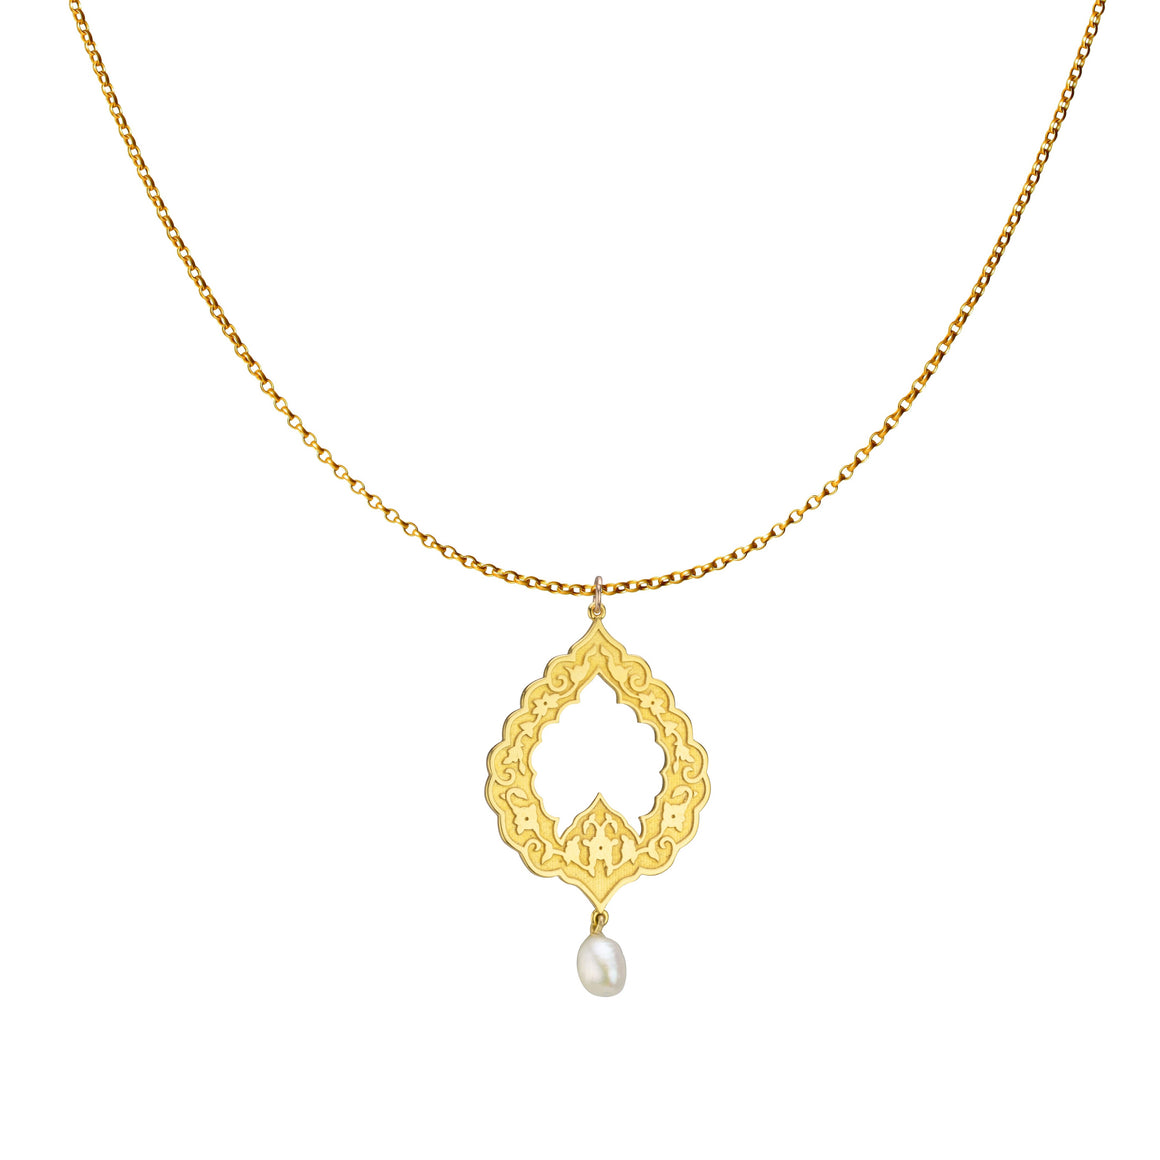 Eslimi Pearl Necklace - 18K Gold